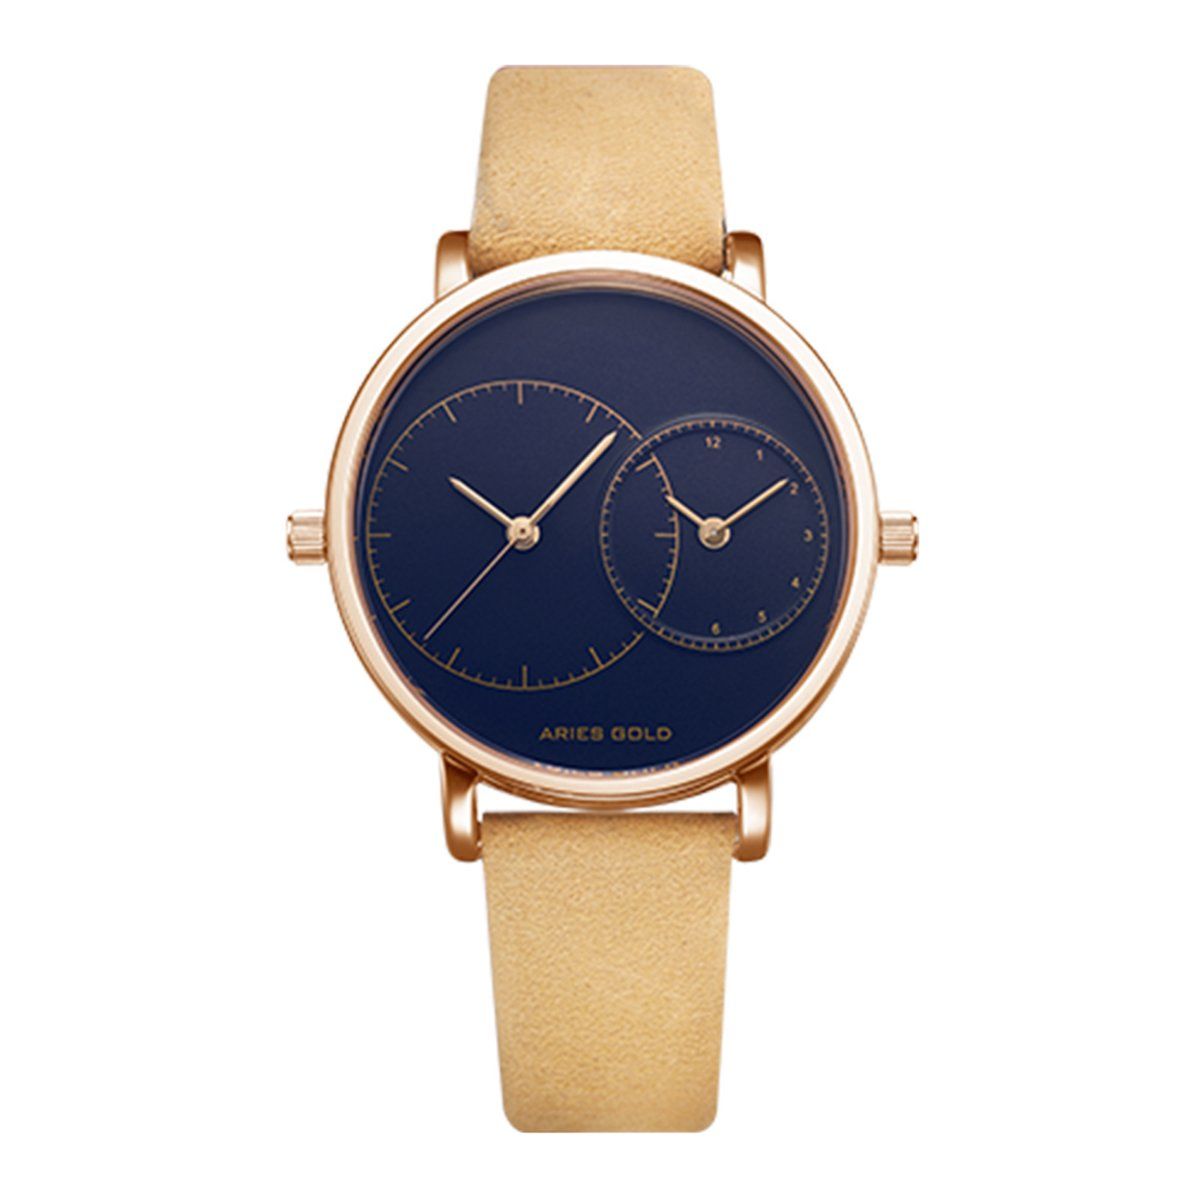 Aries Gold Watches